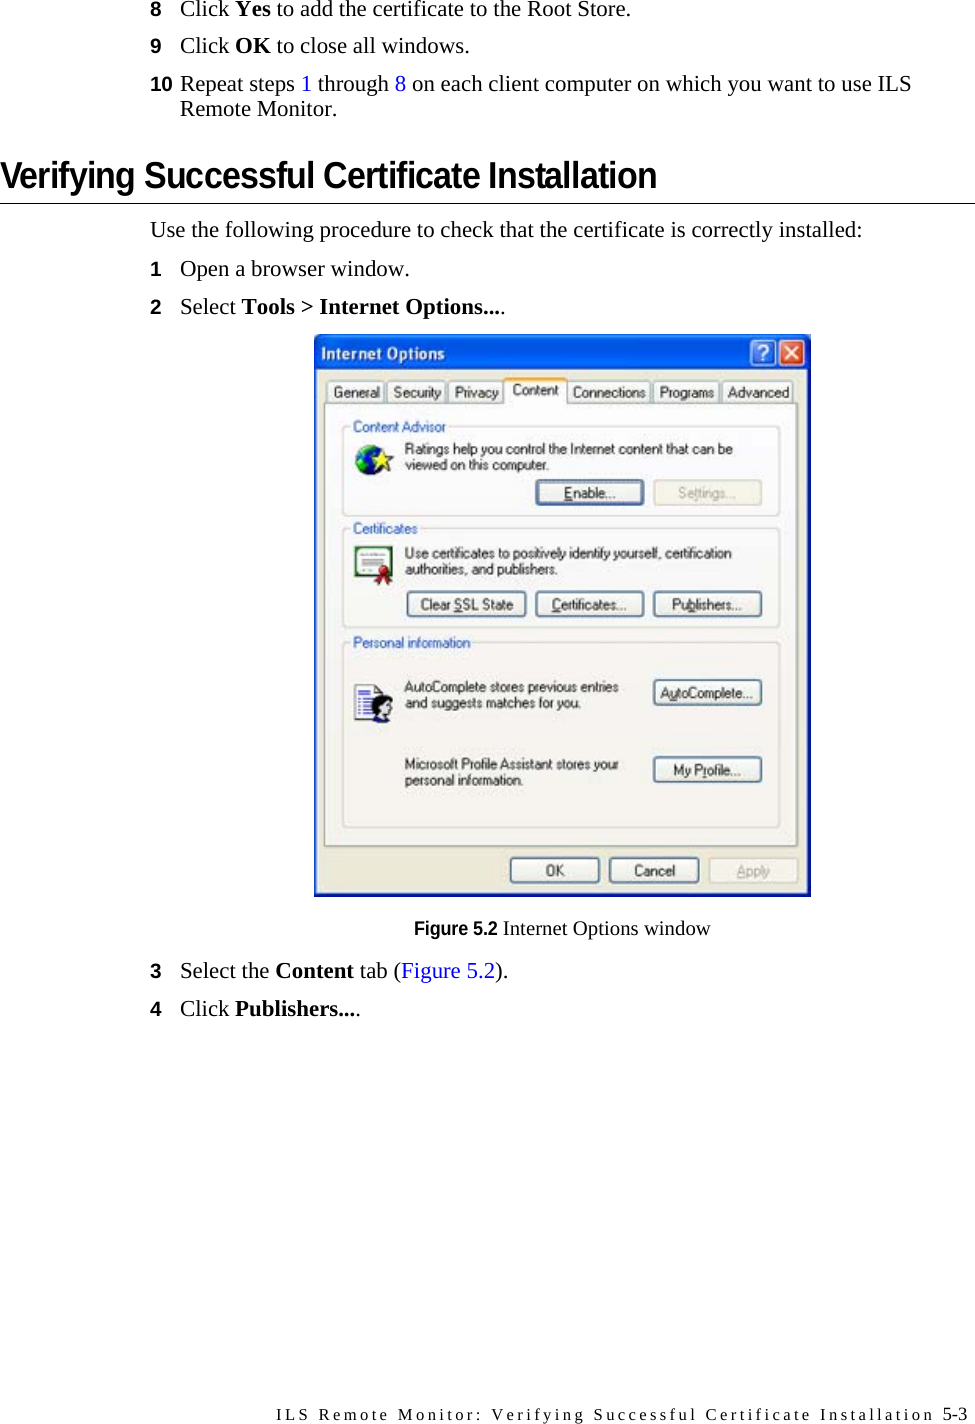 ILS Remote Monitor: Verifying Successful Certificate Installation 5-38Click Yes to add the certificate to the Root Store.9Click OK to close all windows.10 Repeat steps 1 through 8 on each client computer on which you want to use ILS Remote Monitor.Verifying Successful Certificate InstallationUse the following procedure to check that the certificate is correctly installed:1Open a browser window.2Select Tools &gt; Internet Options....Figure 5.2 Internet Options window3Select the Content tab (Figure 5.2). 4Click Publishers....